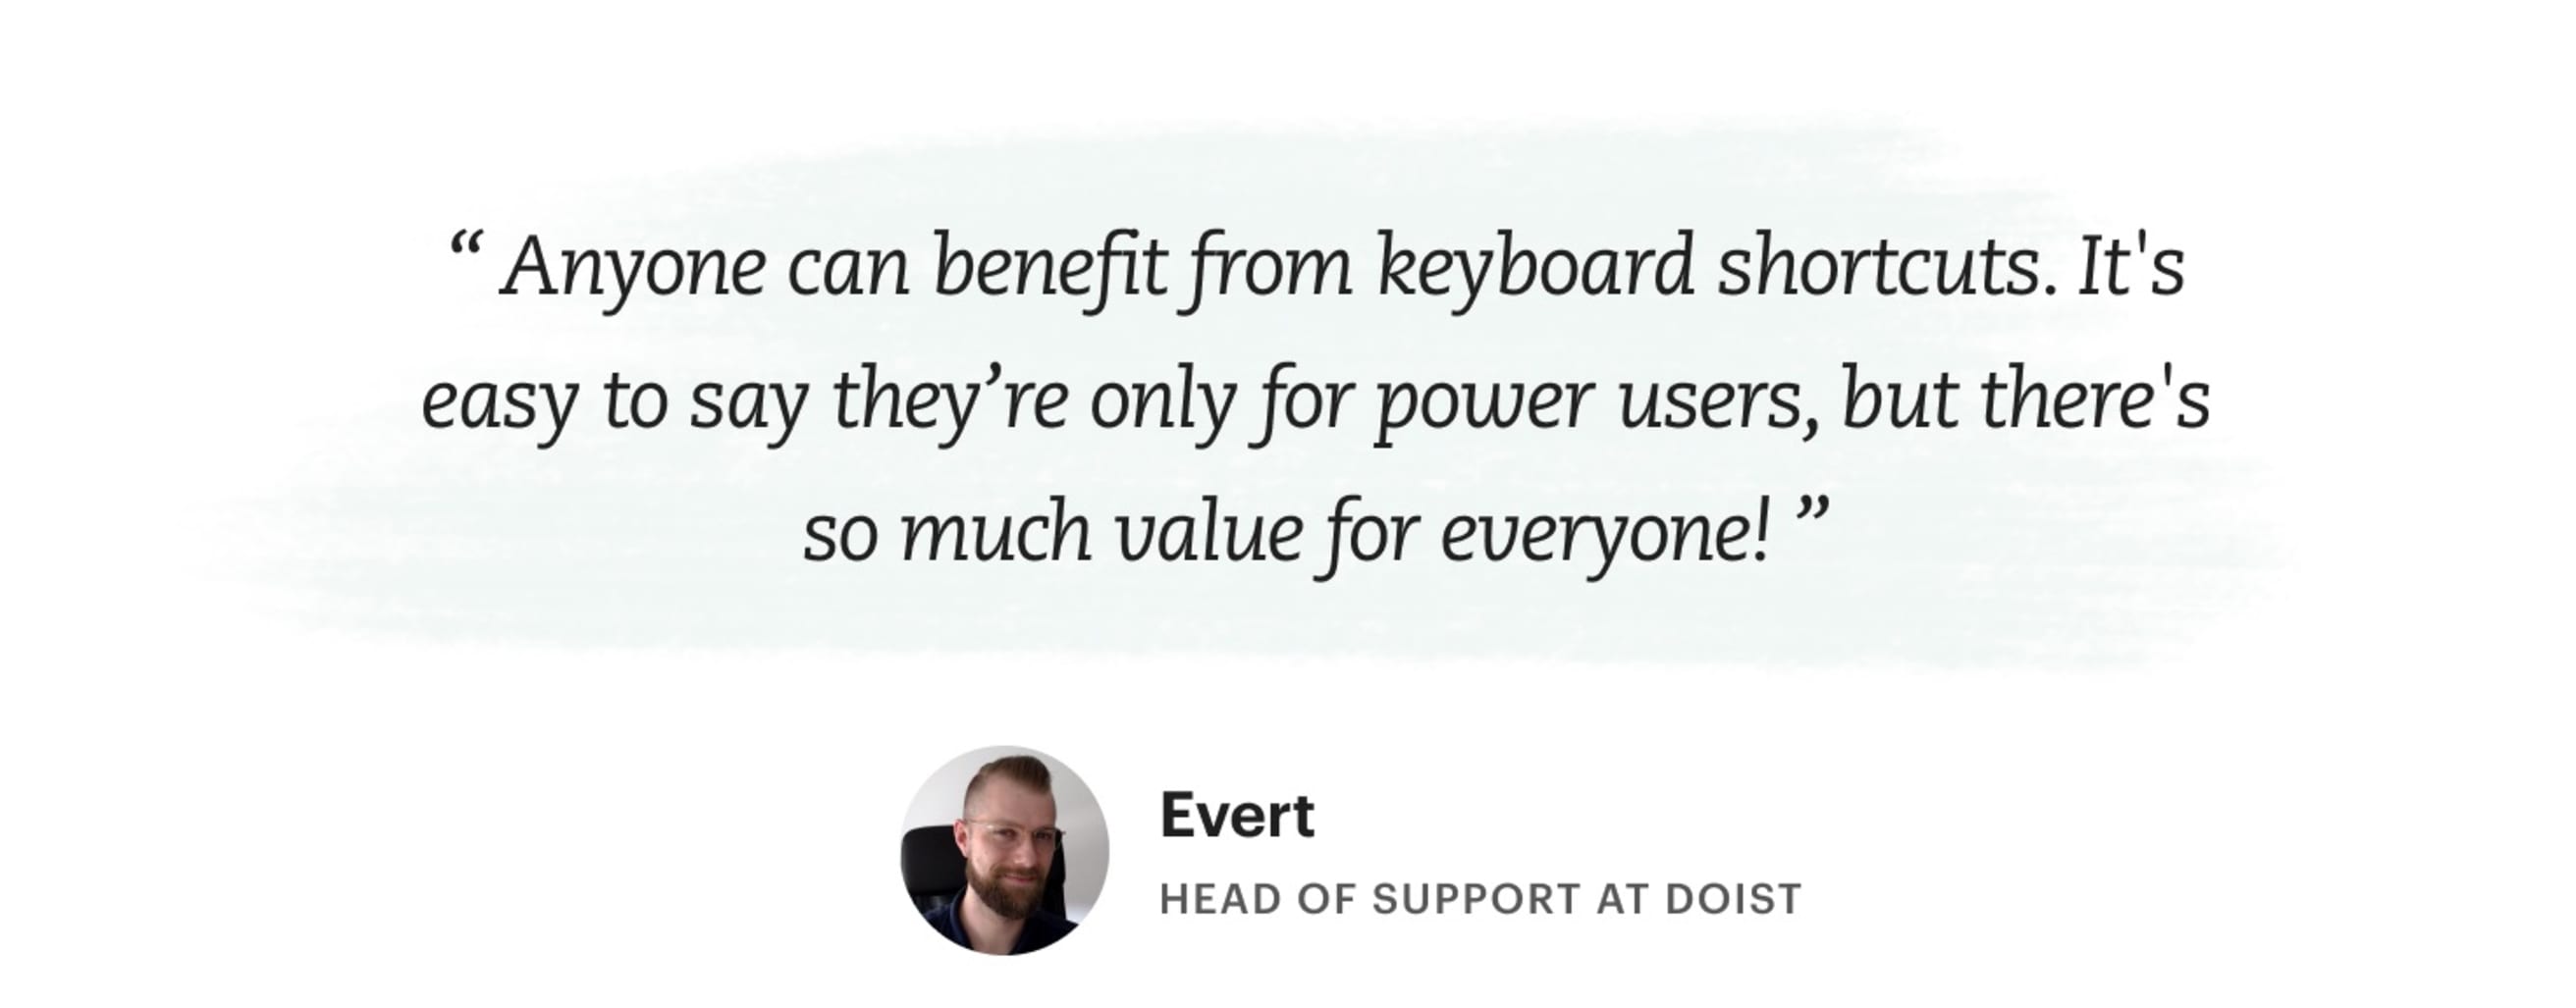 &quot;Anyone can benefit from keyboard shortcuts. It's easy to say they're only for power users, but there's so much value for everyone!&quot; Evert – Head of Support at Doist